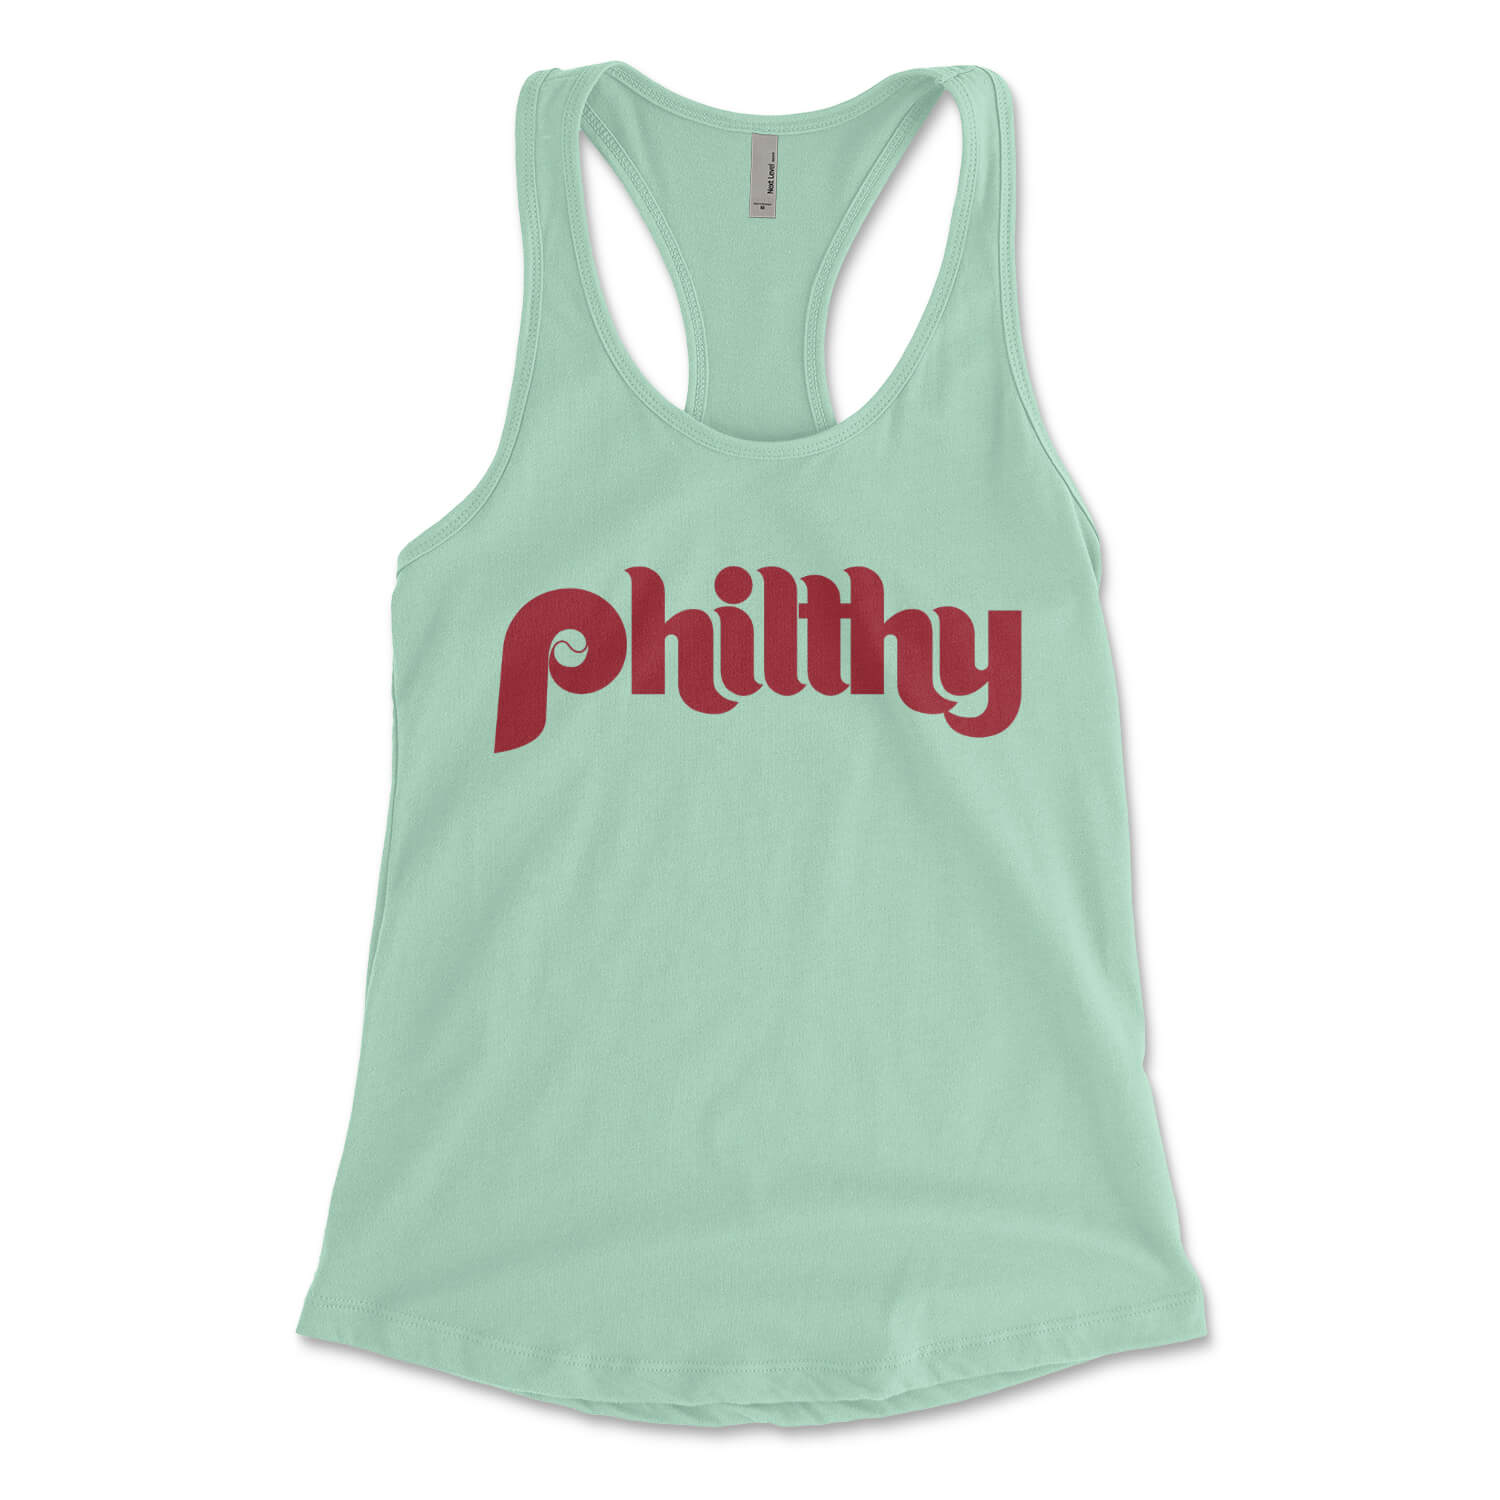 Philadelphia Phillies Philthy mint green womens racerback tank top from Phillygoat 